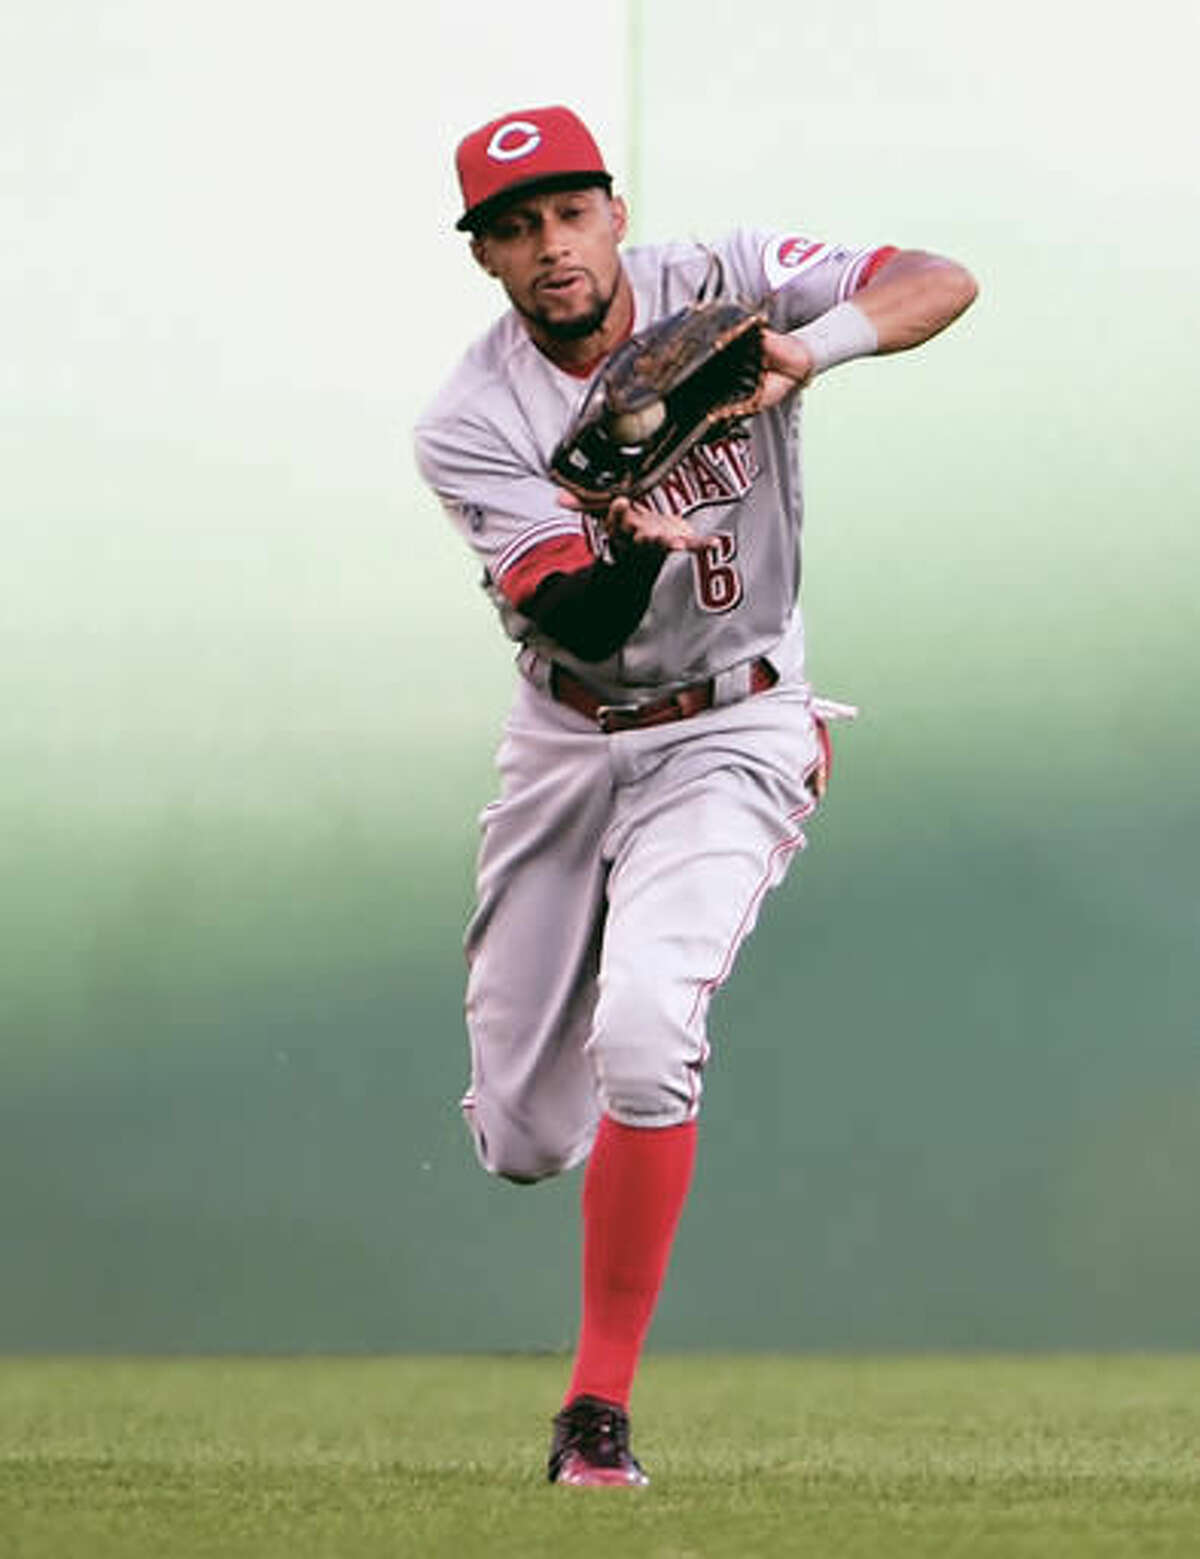 Cincinnati Reds center fielder Billy Hamilton makes a catch in the first inning of a baseball game against the Pittsburgh Pirates in Pittsburgh, Saturday, Aug. 6, 2016. (AP Photo/Fred Vuich)